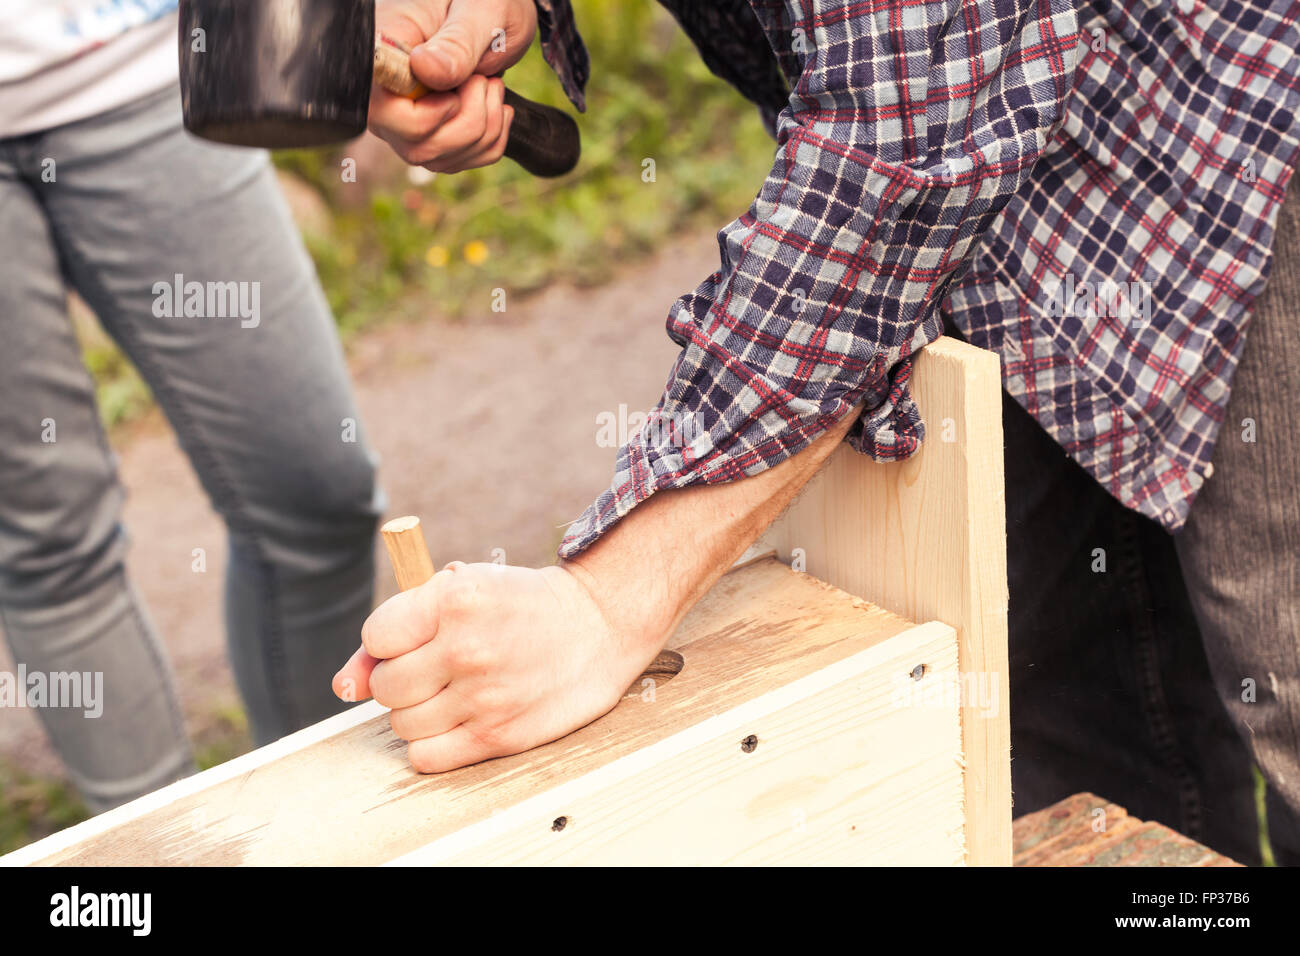 Wooden birdhouse is under construction, carpenter works with rubber hummer Stock Photo